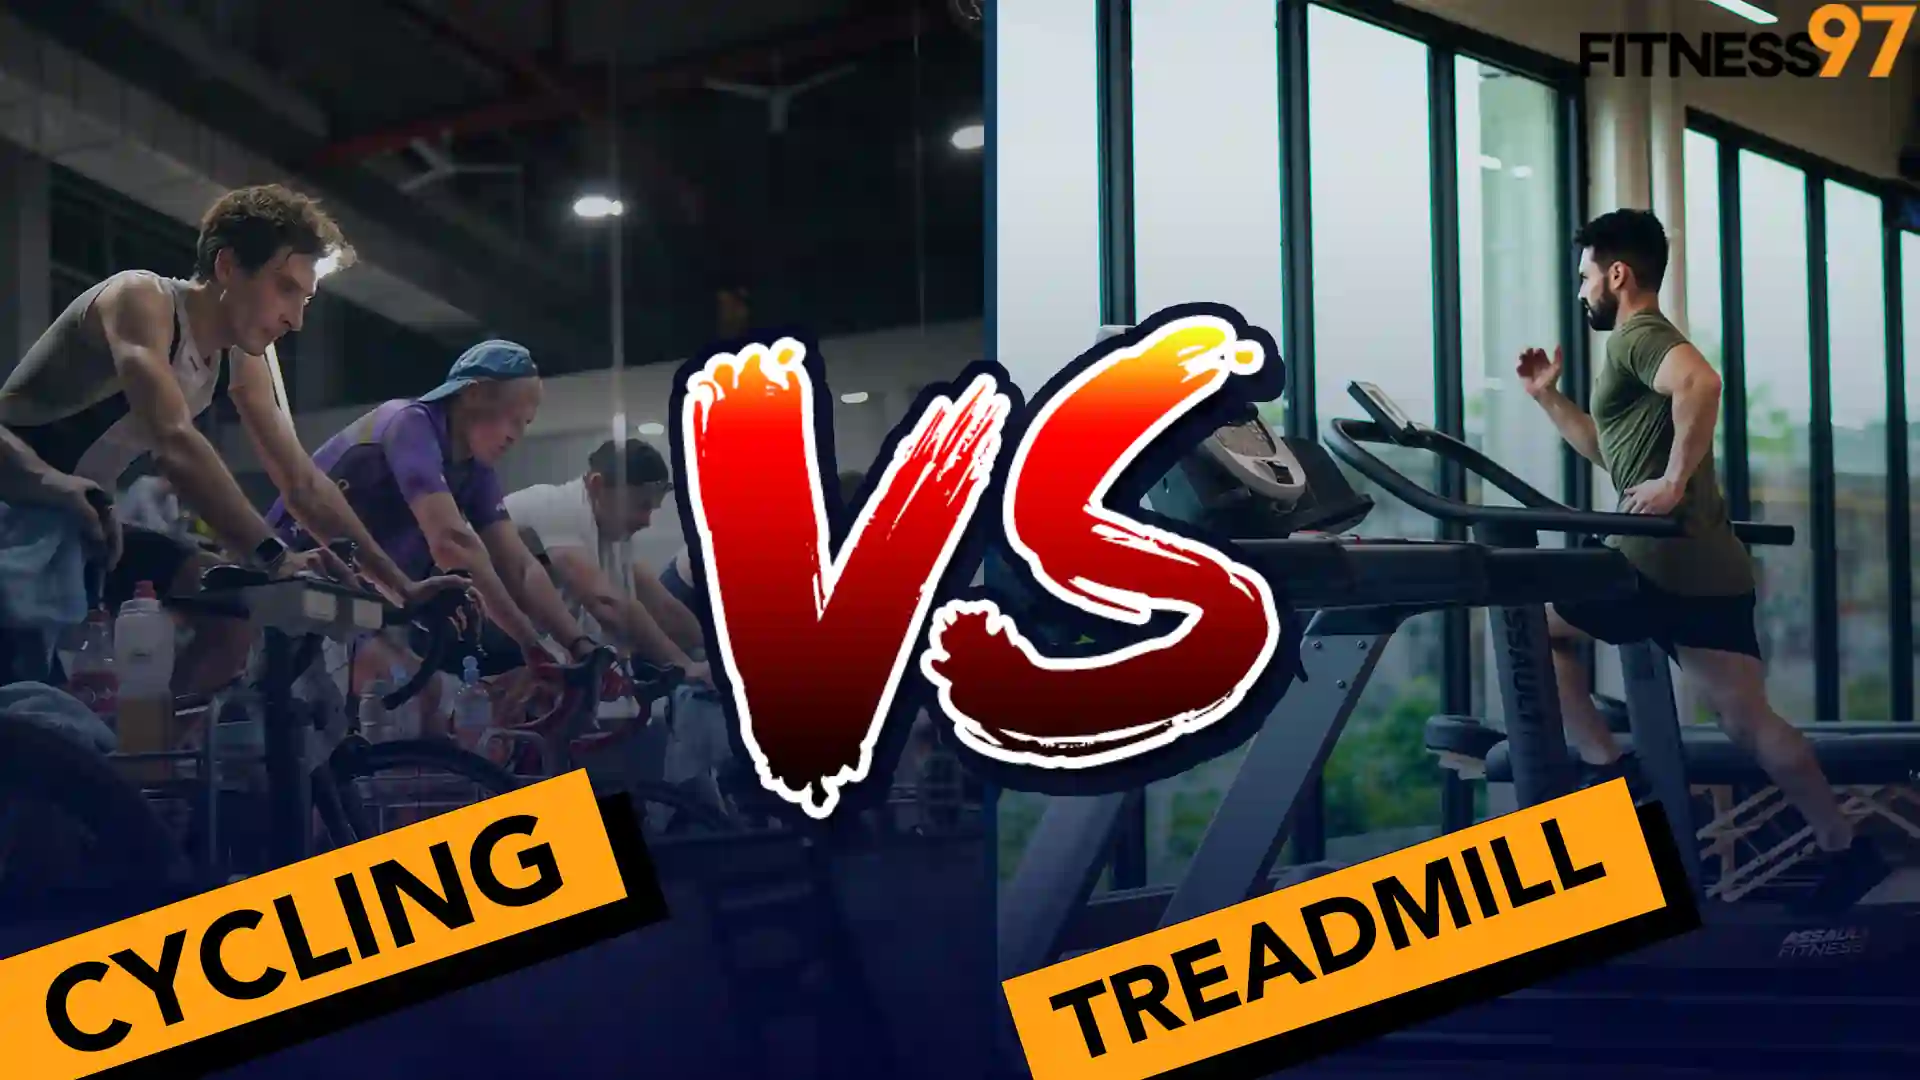 Cycling Vs Treadmill- Which one is best for weight loss